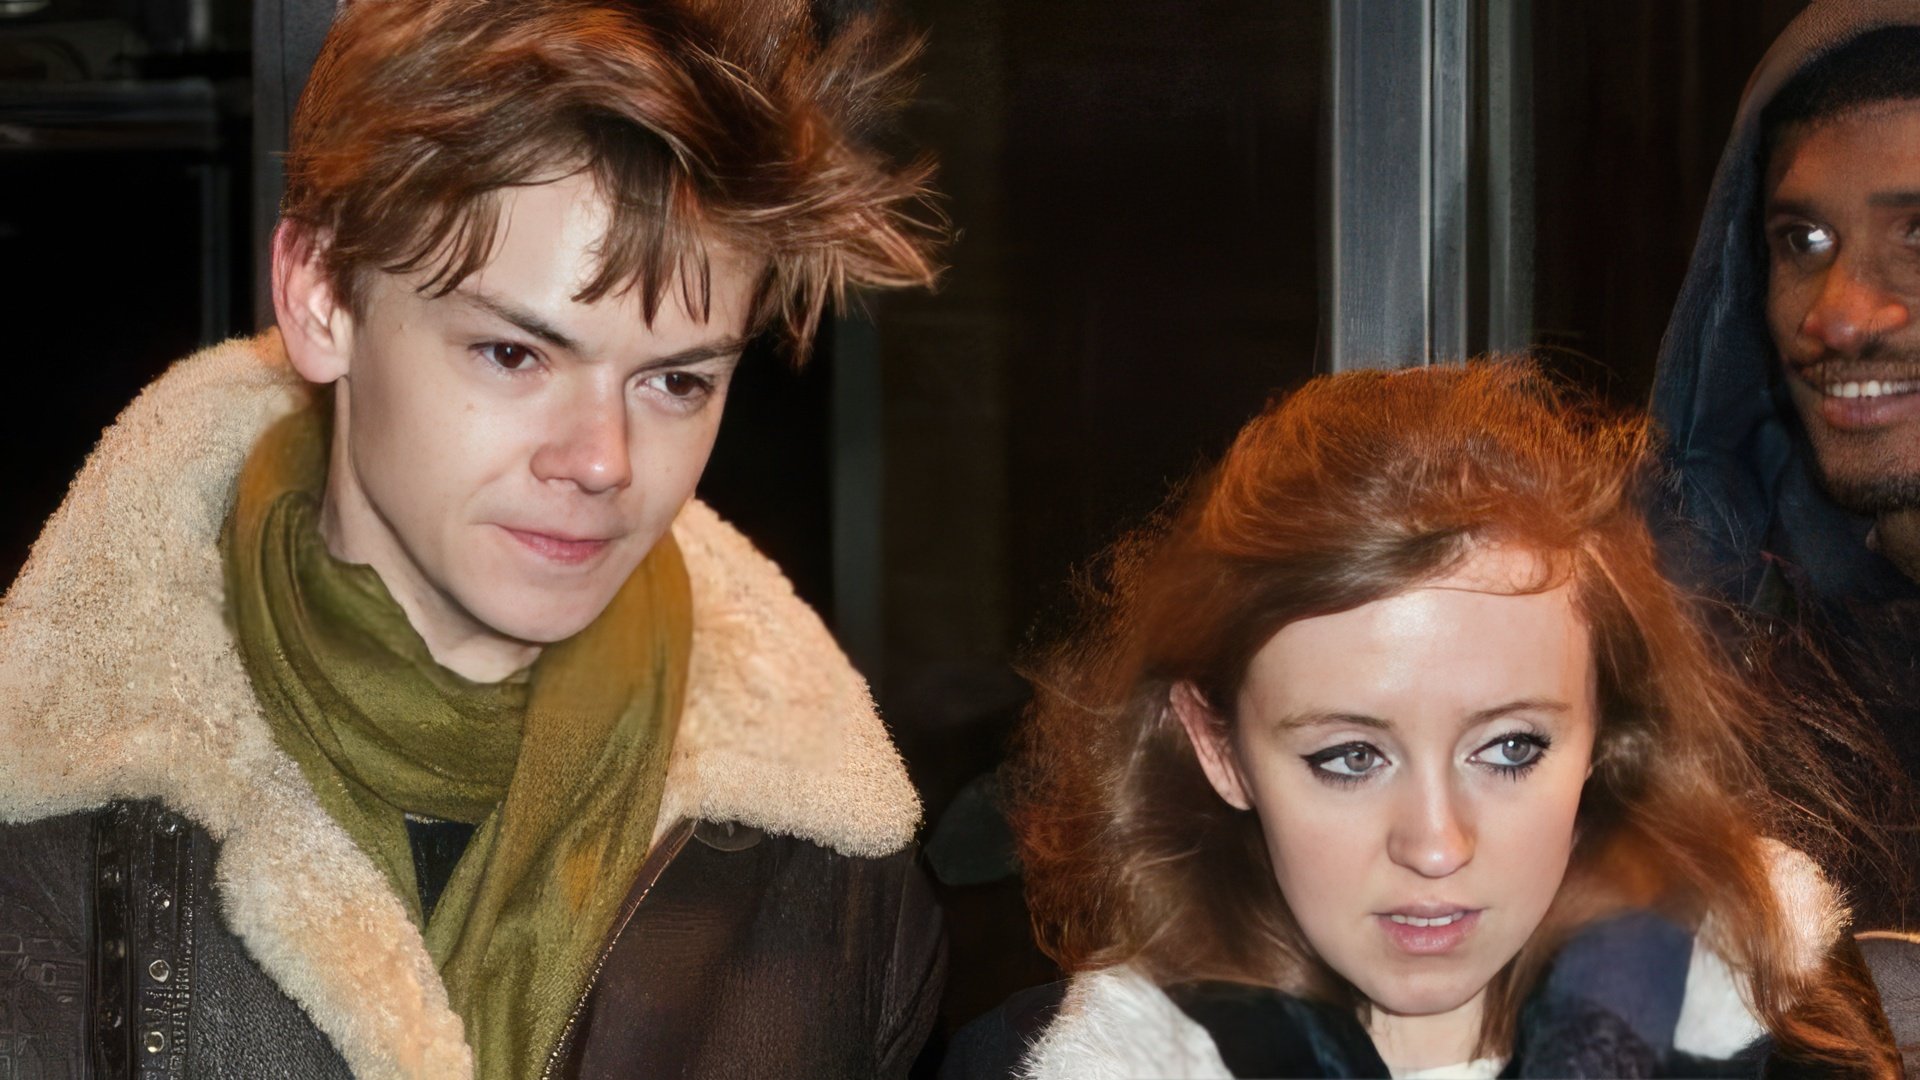 Thomas Sangster and his ex-girlfriend Isabella Melling